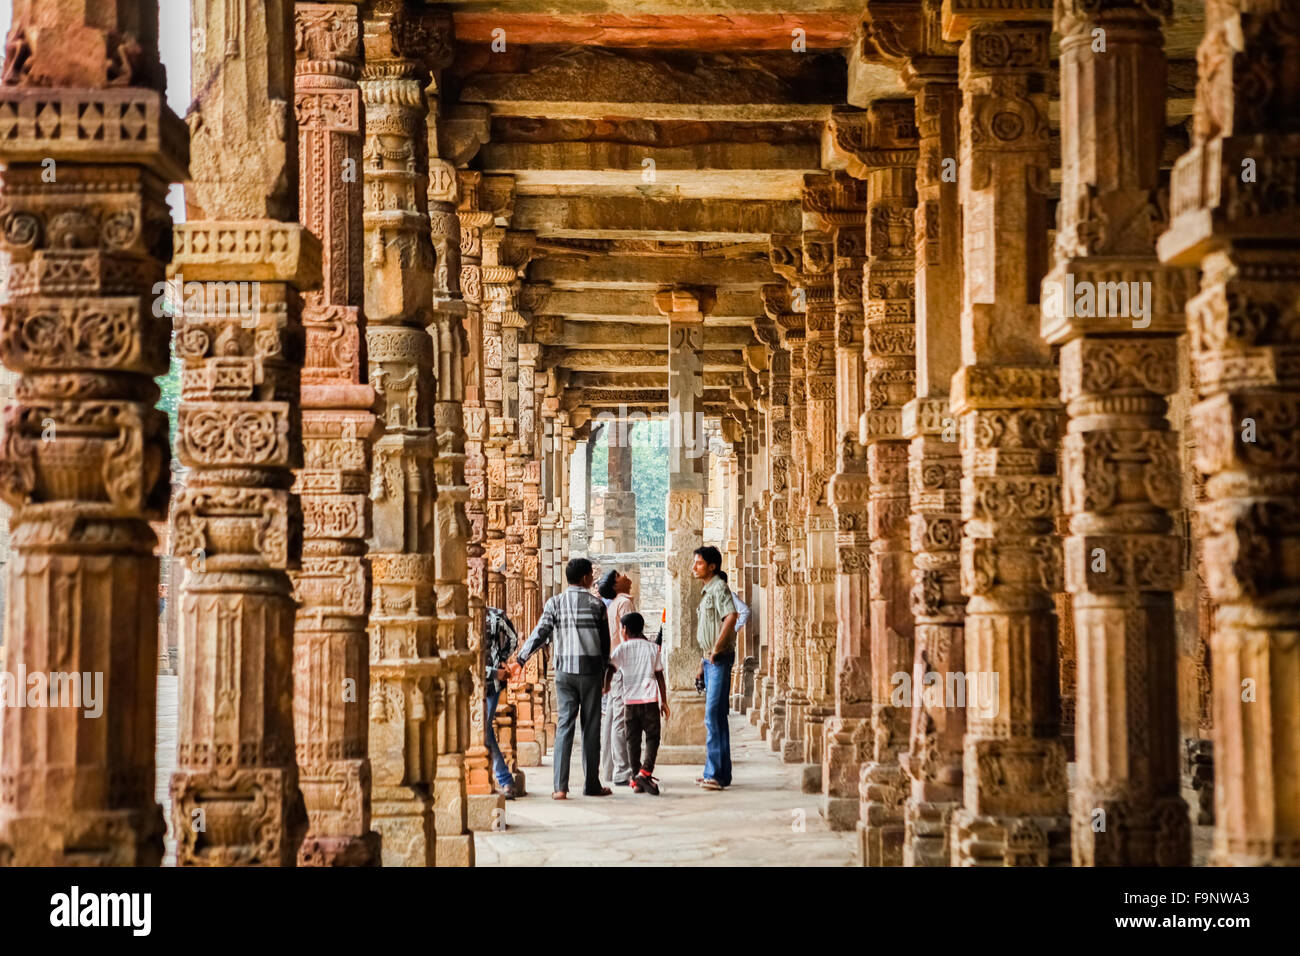 Local tourists admiring intricate stone carvings on the cloister columns at Quwwat ul-Islam Mosque inside Qutb complex, Delhi. Stock Photo